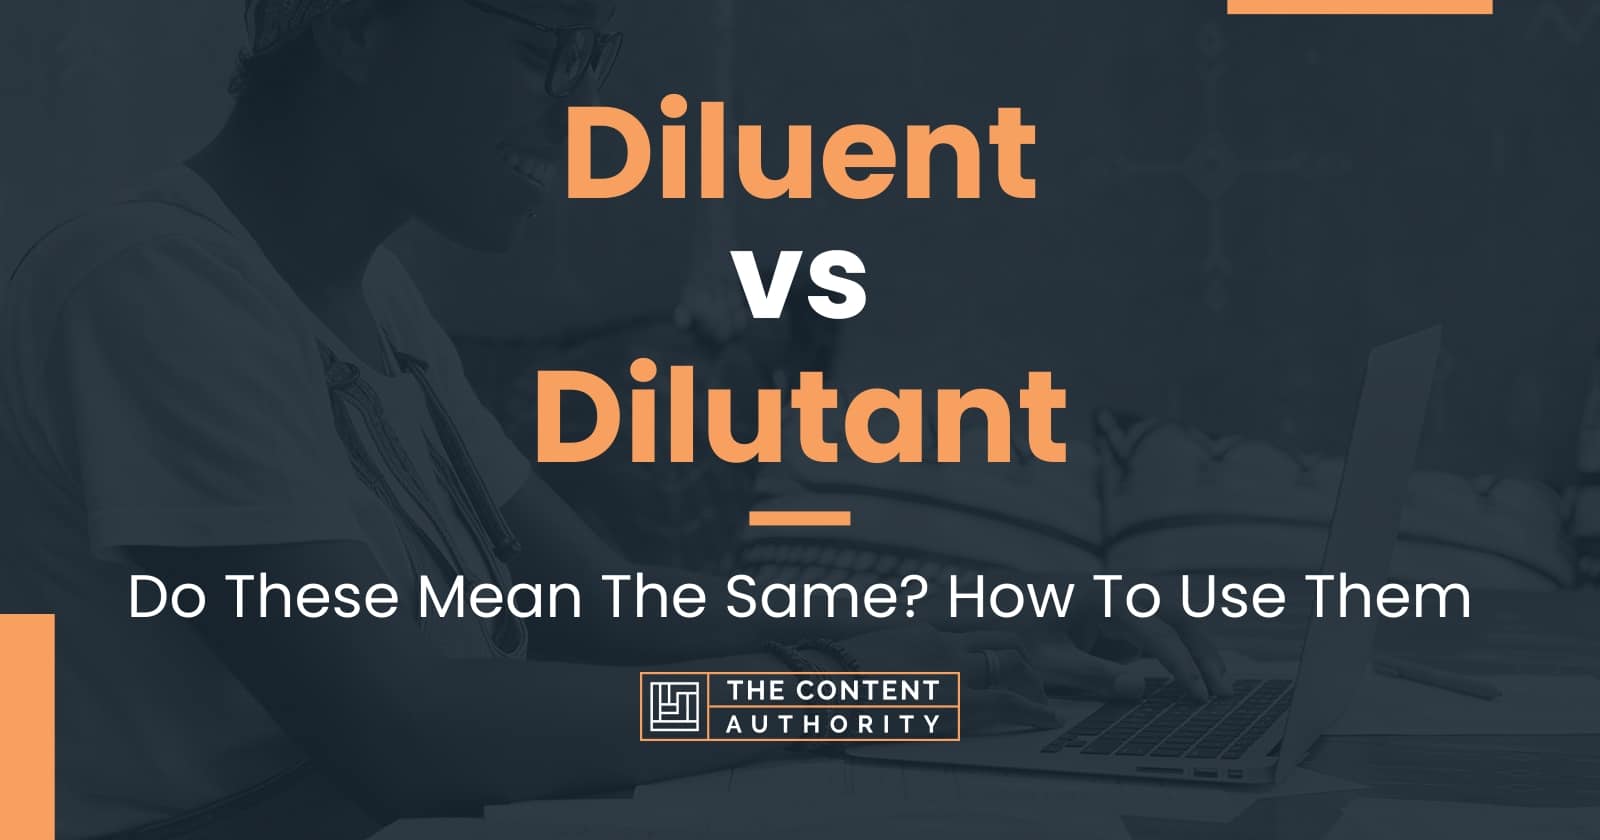 Diluent vs Dilutant: Do These Mean The Same? How To Use Them